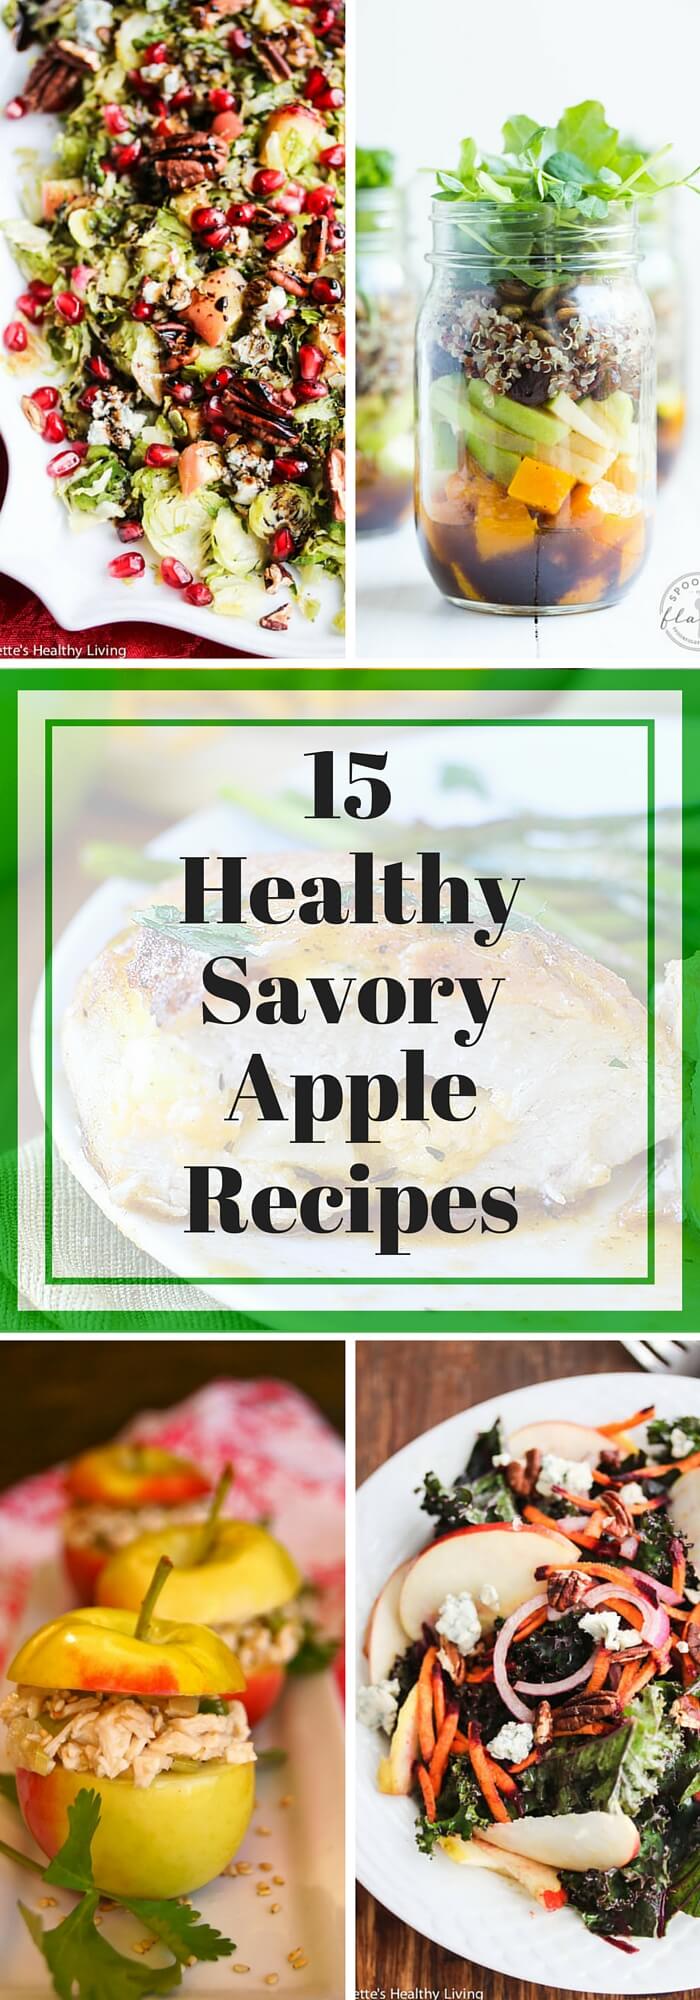 15 Healthy Savory Apple Recipes - Enjoy all the delicious apples that are in season by using them in this collection of salads, sandwiches, stuffed chicken and more